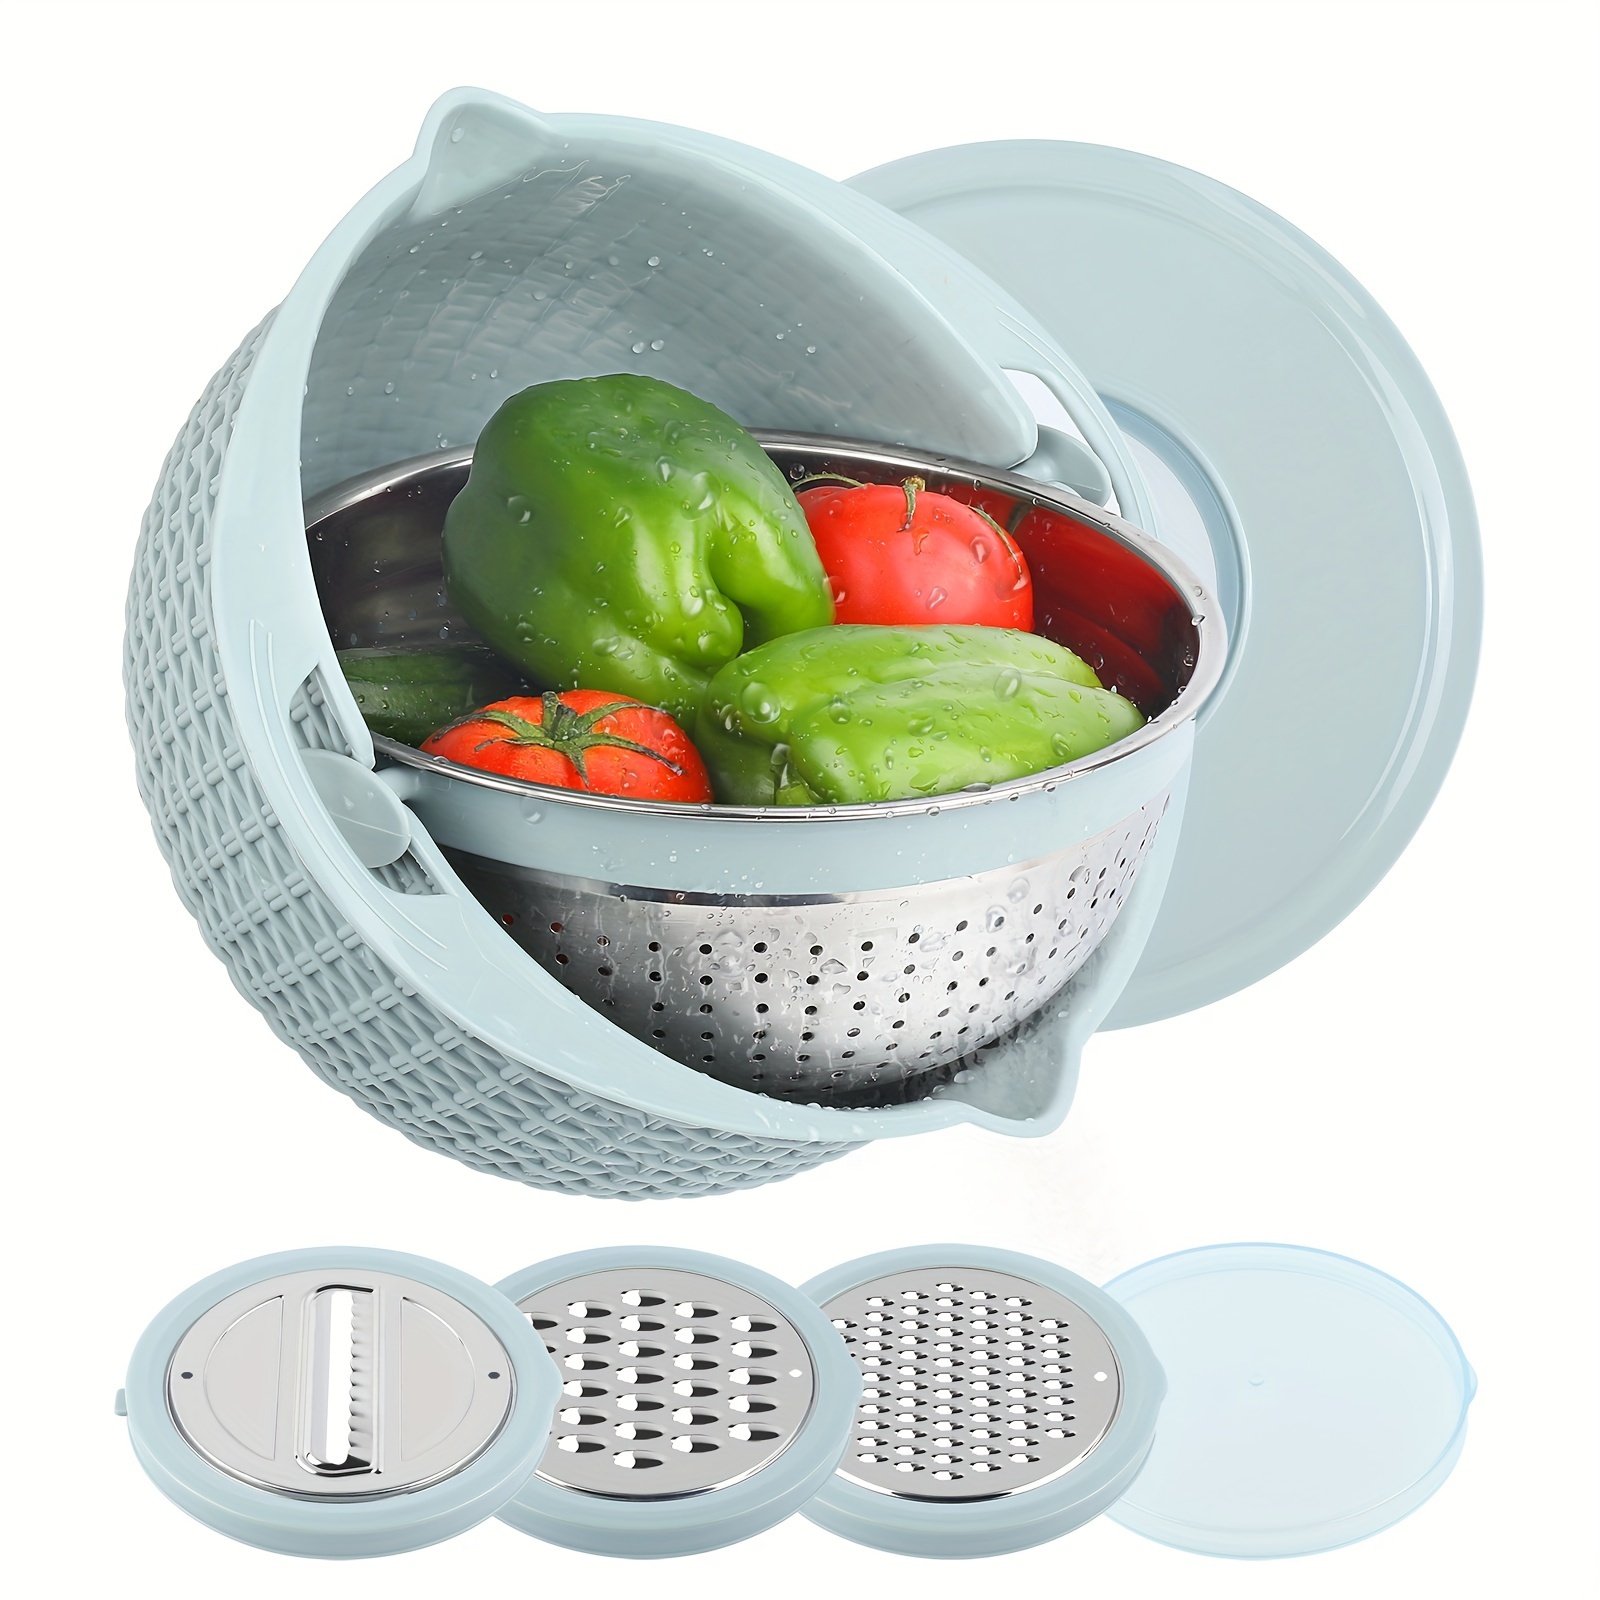 

4-1 Mixing Bowls With Lids Set 3 Grater Attachments Strainers And Colanders For Kitchen Food Strainers And Colanders Great For Mixing & Serving